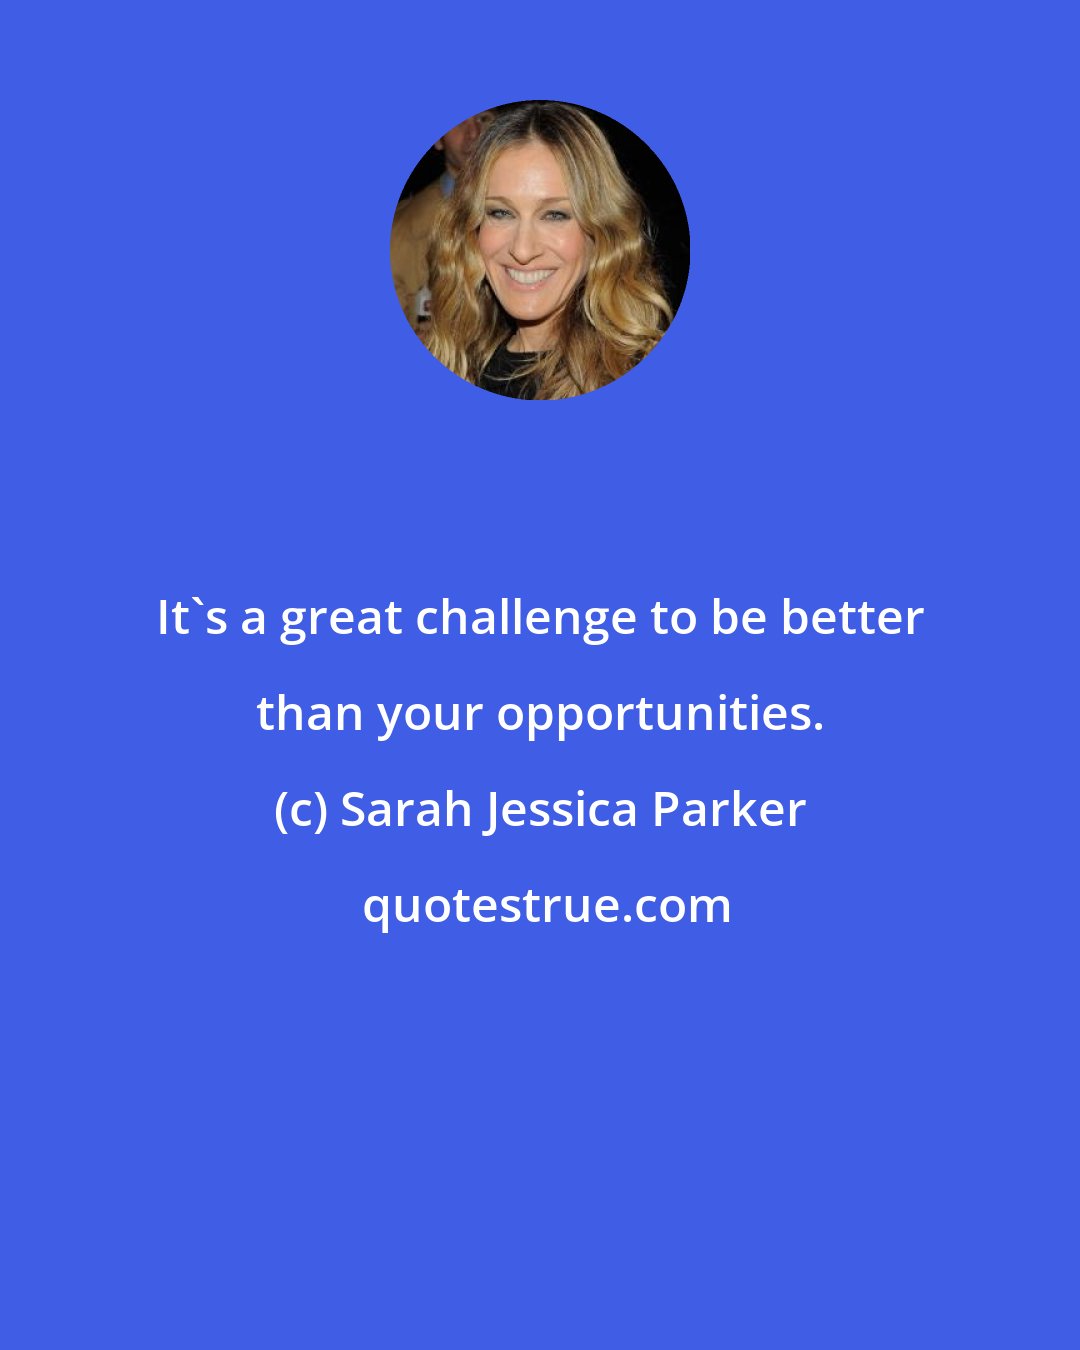 Sarah Jessica Parker: It's a great challenge to be better than your opportunities.